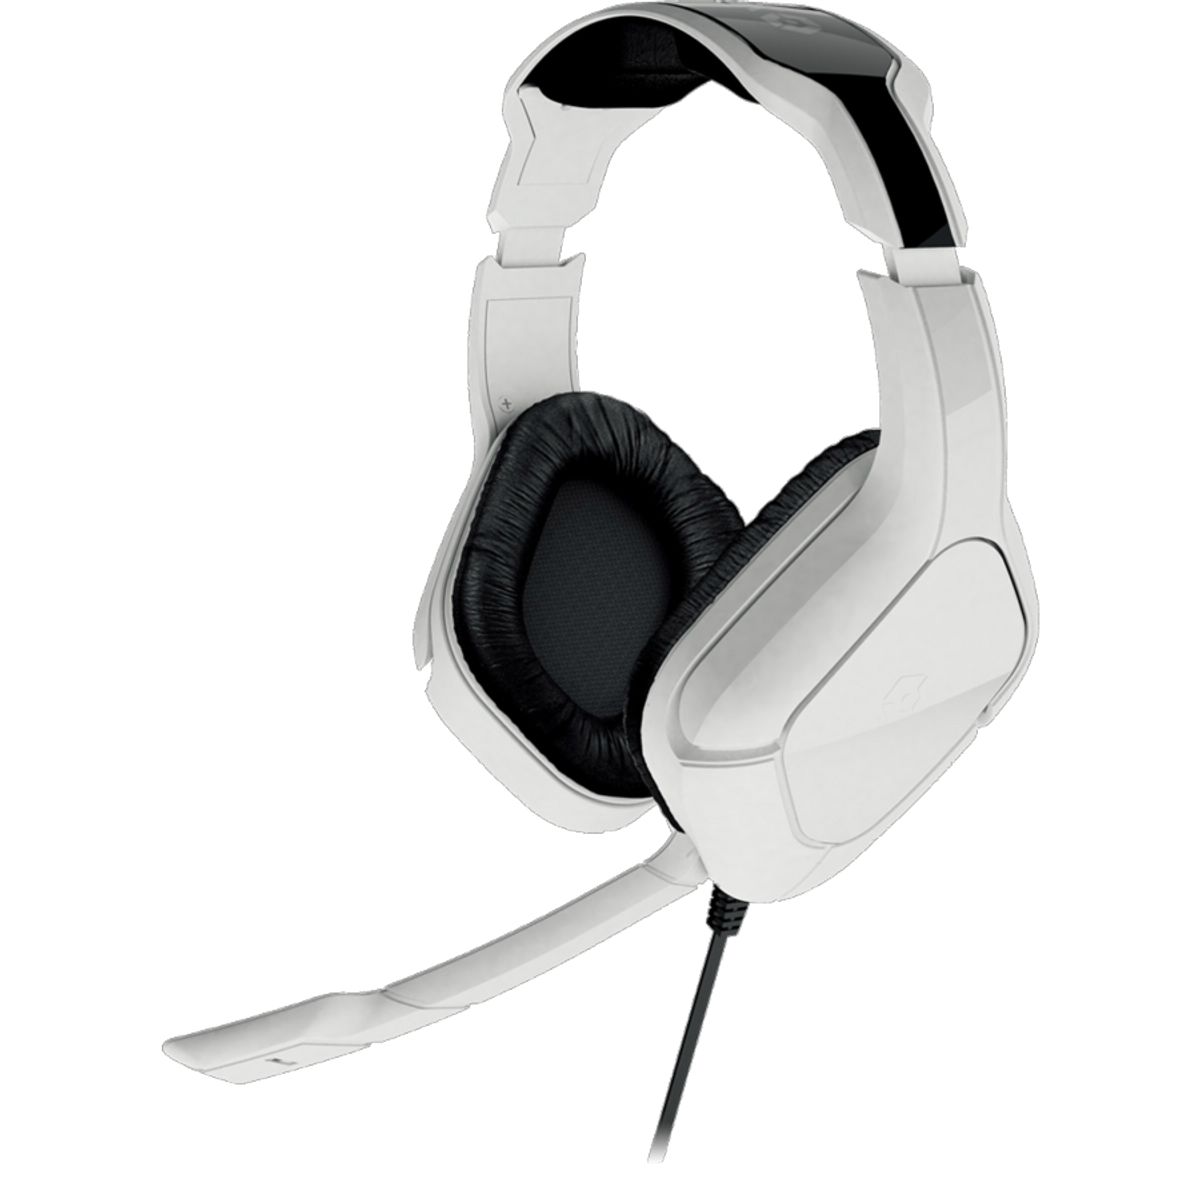 SUBSONIC Weiß Headset SX6 Over-ear Gaming STORM WIRED,